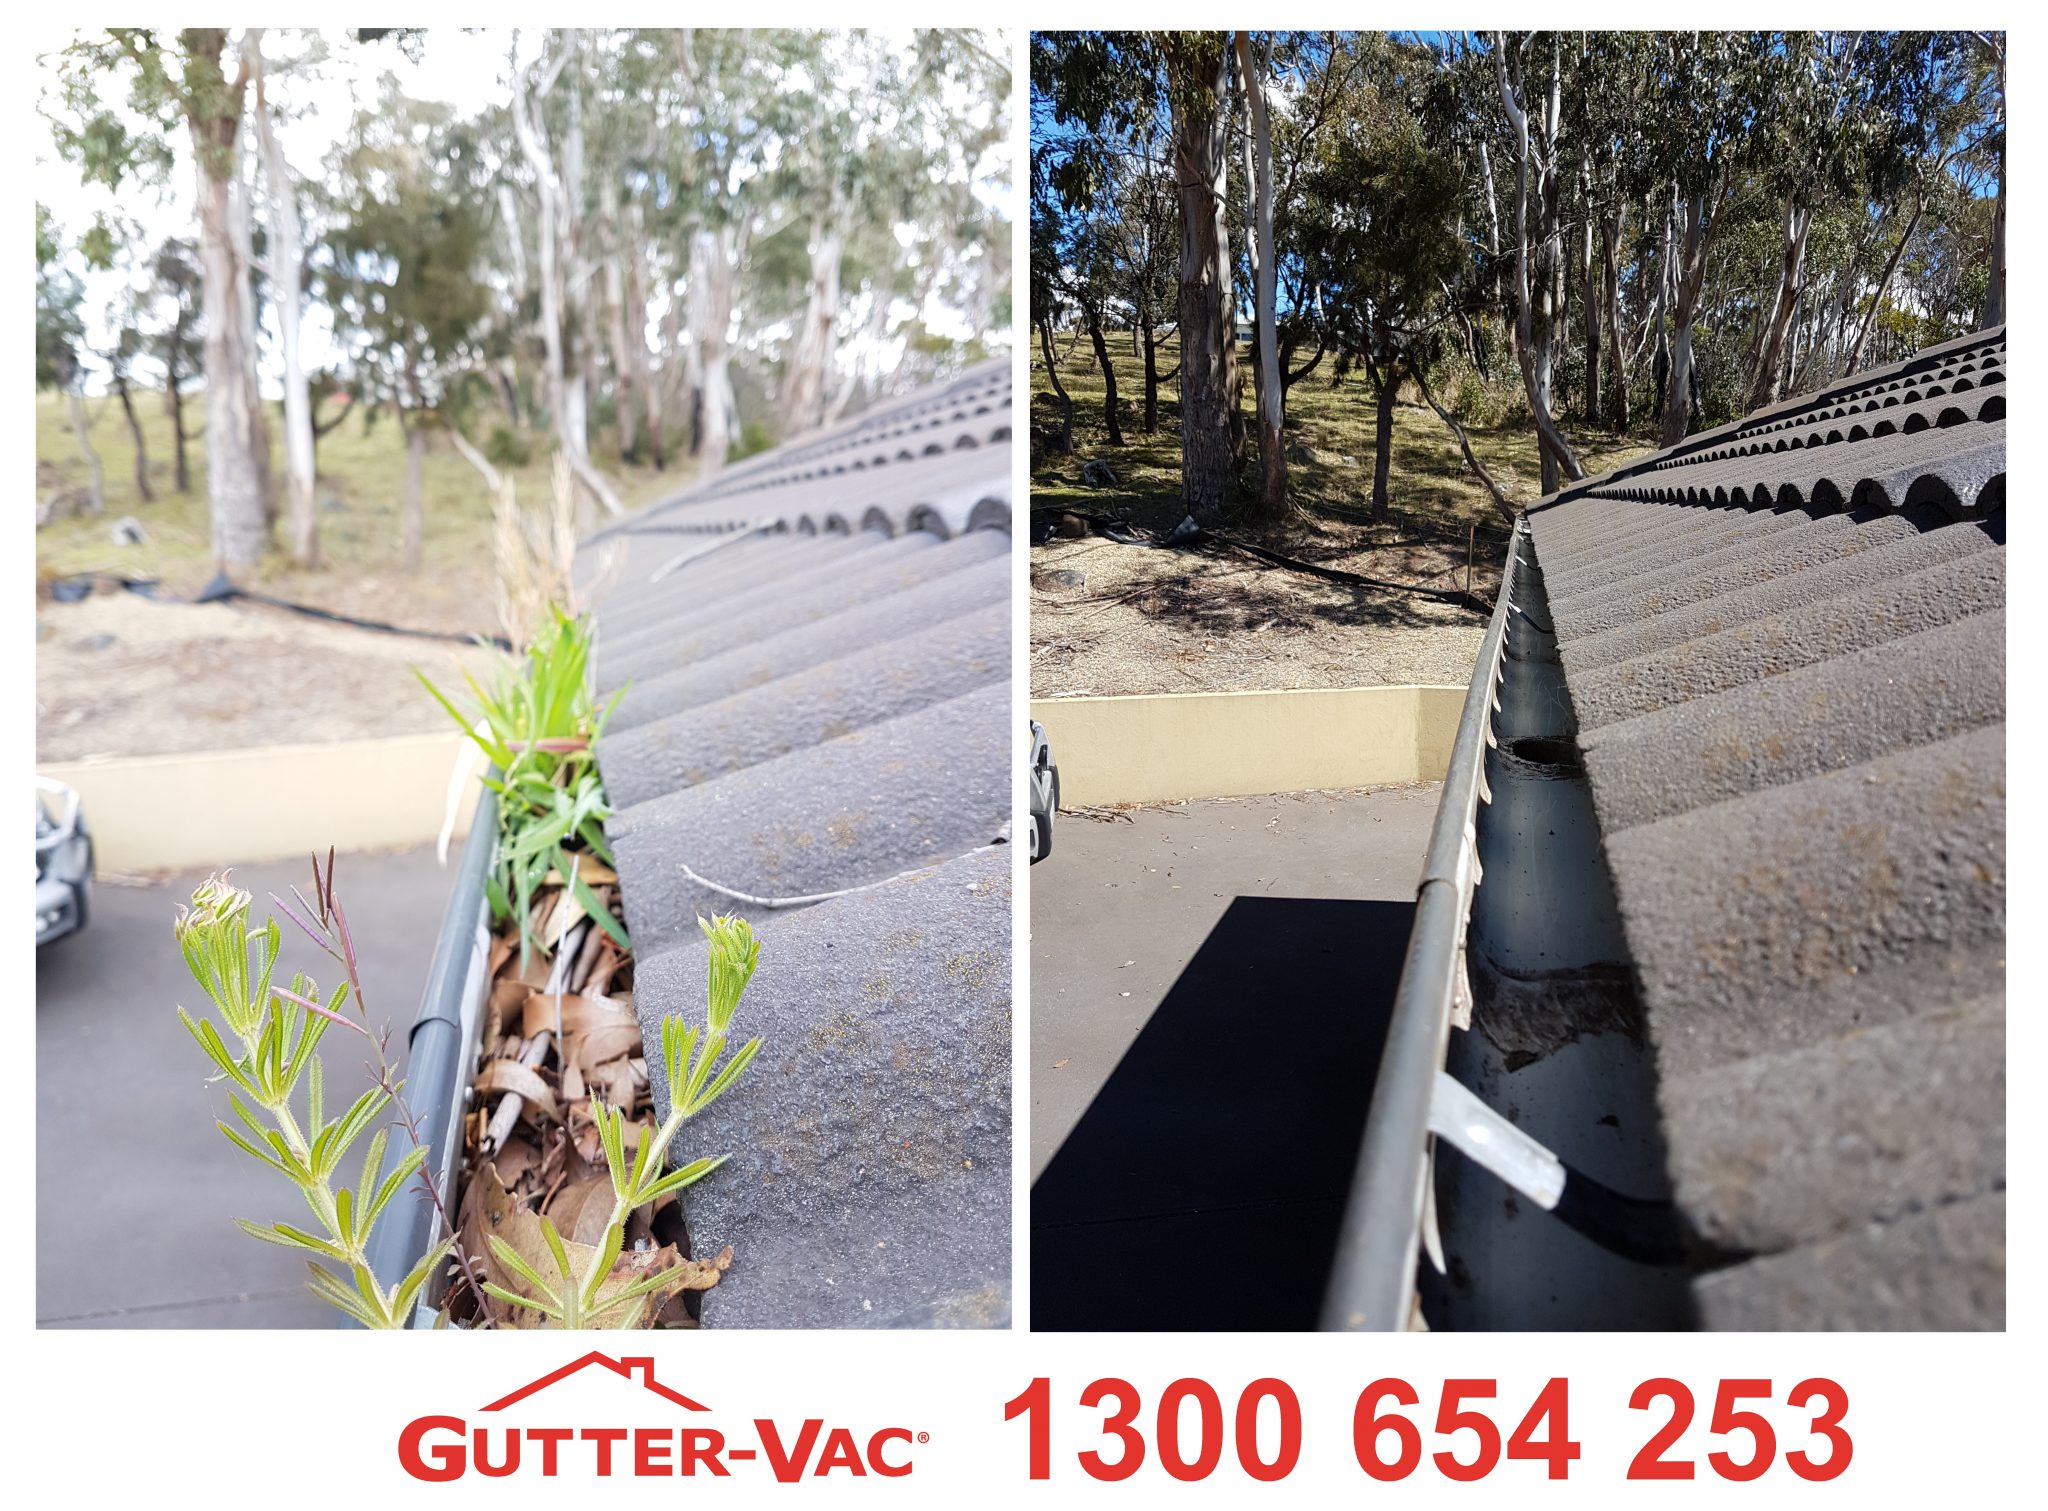 Bush Fire Prevention- Is Gutter Cleaning on Your List?